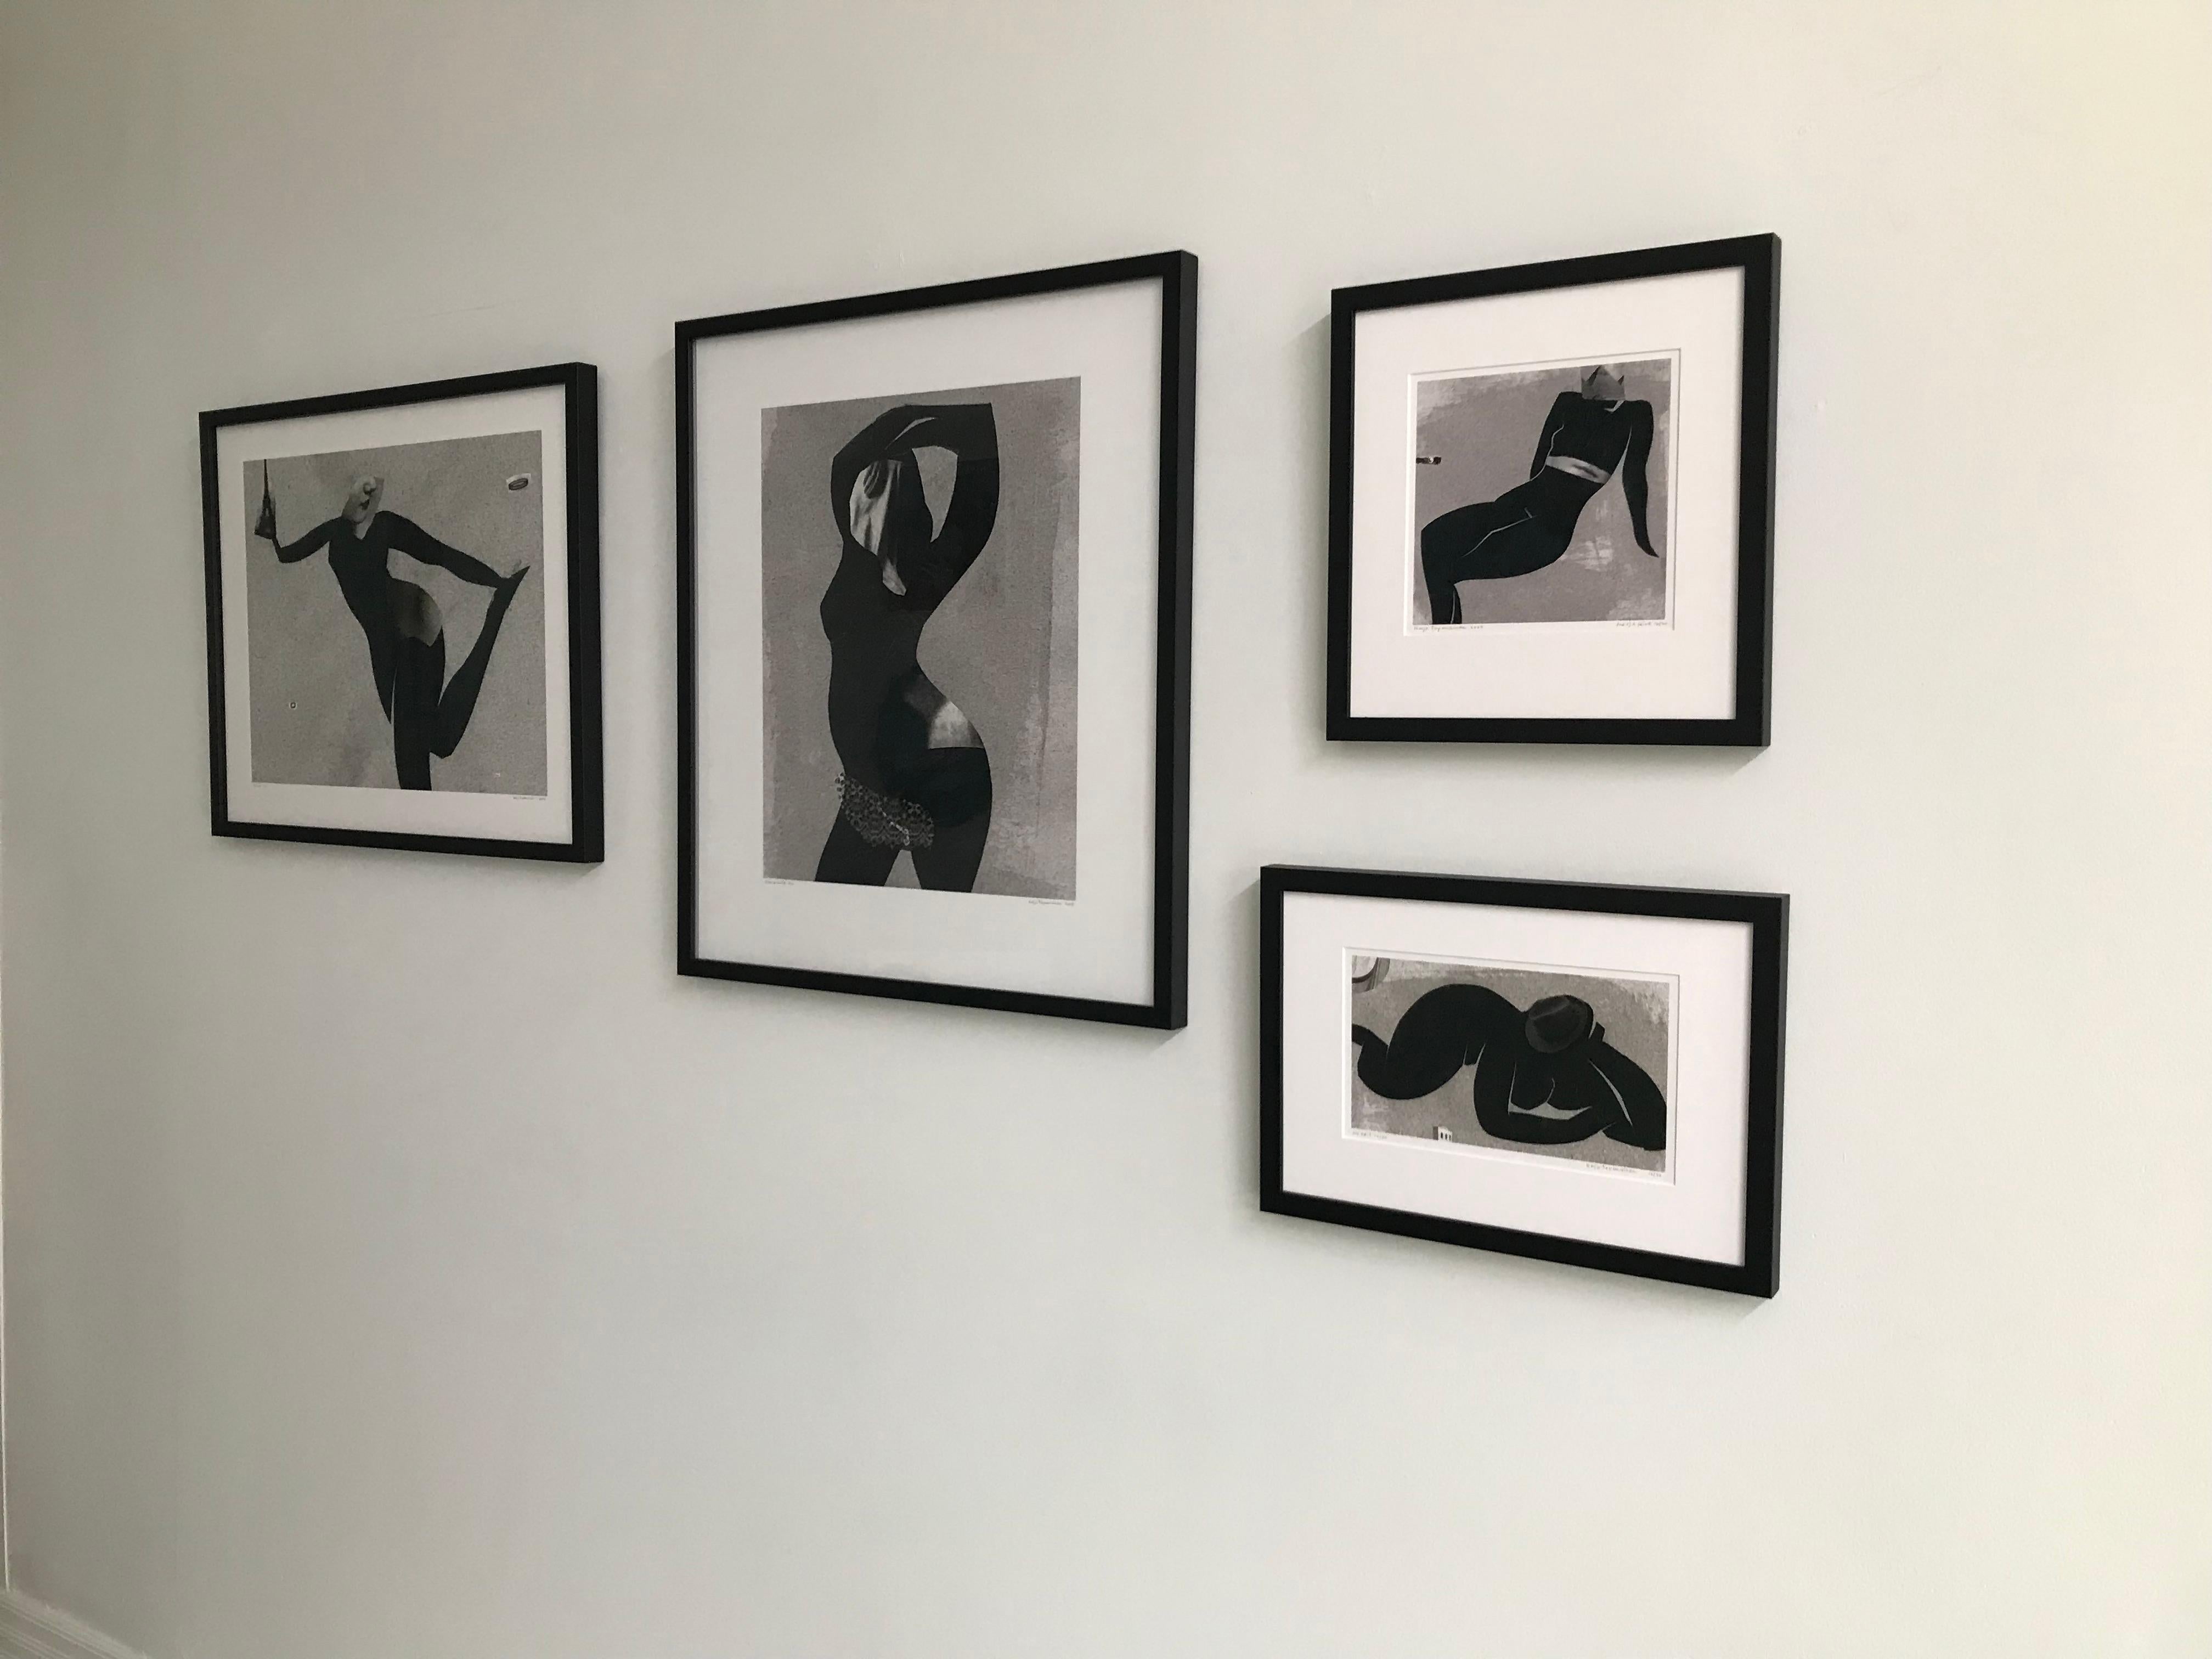 Keijo Tapanainen captures the beauty, simplicity and sensuality of the human form in this intimate series of hand-cut carbon paper works. The elegant lines and sophistication of these images contrast with the textural surface used. Tapanainen takes